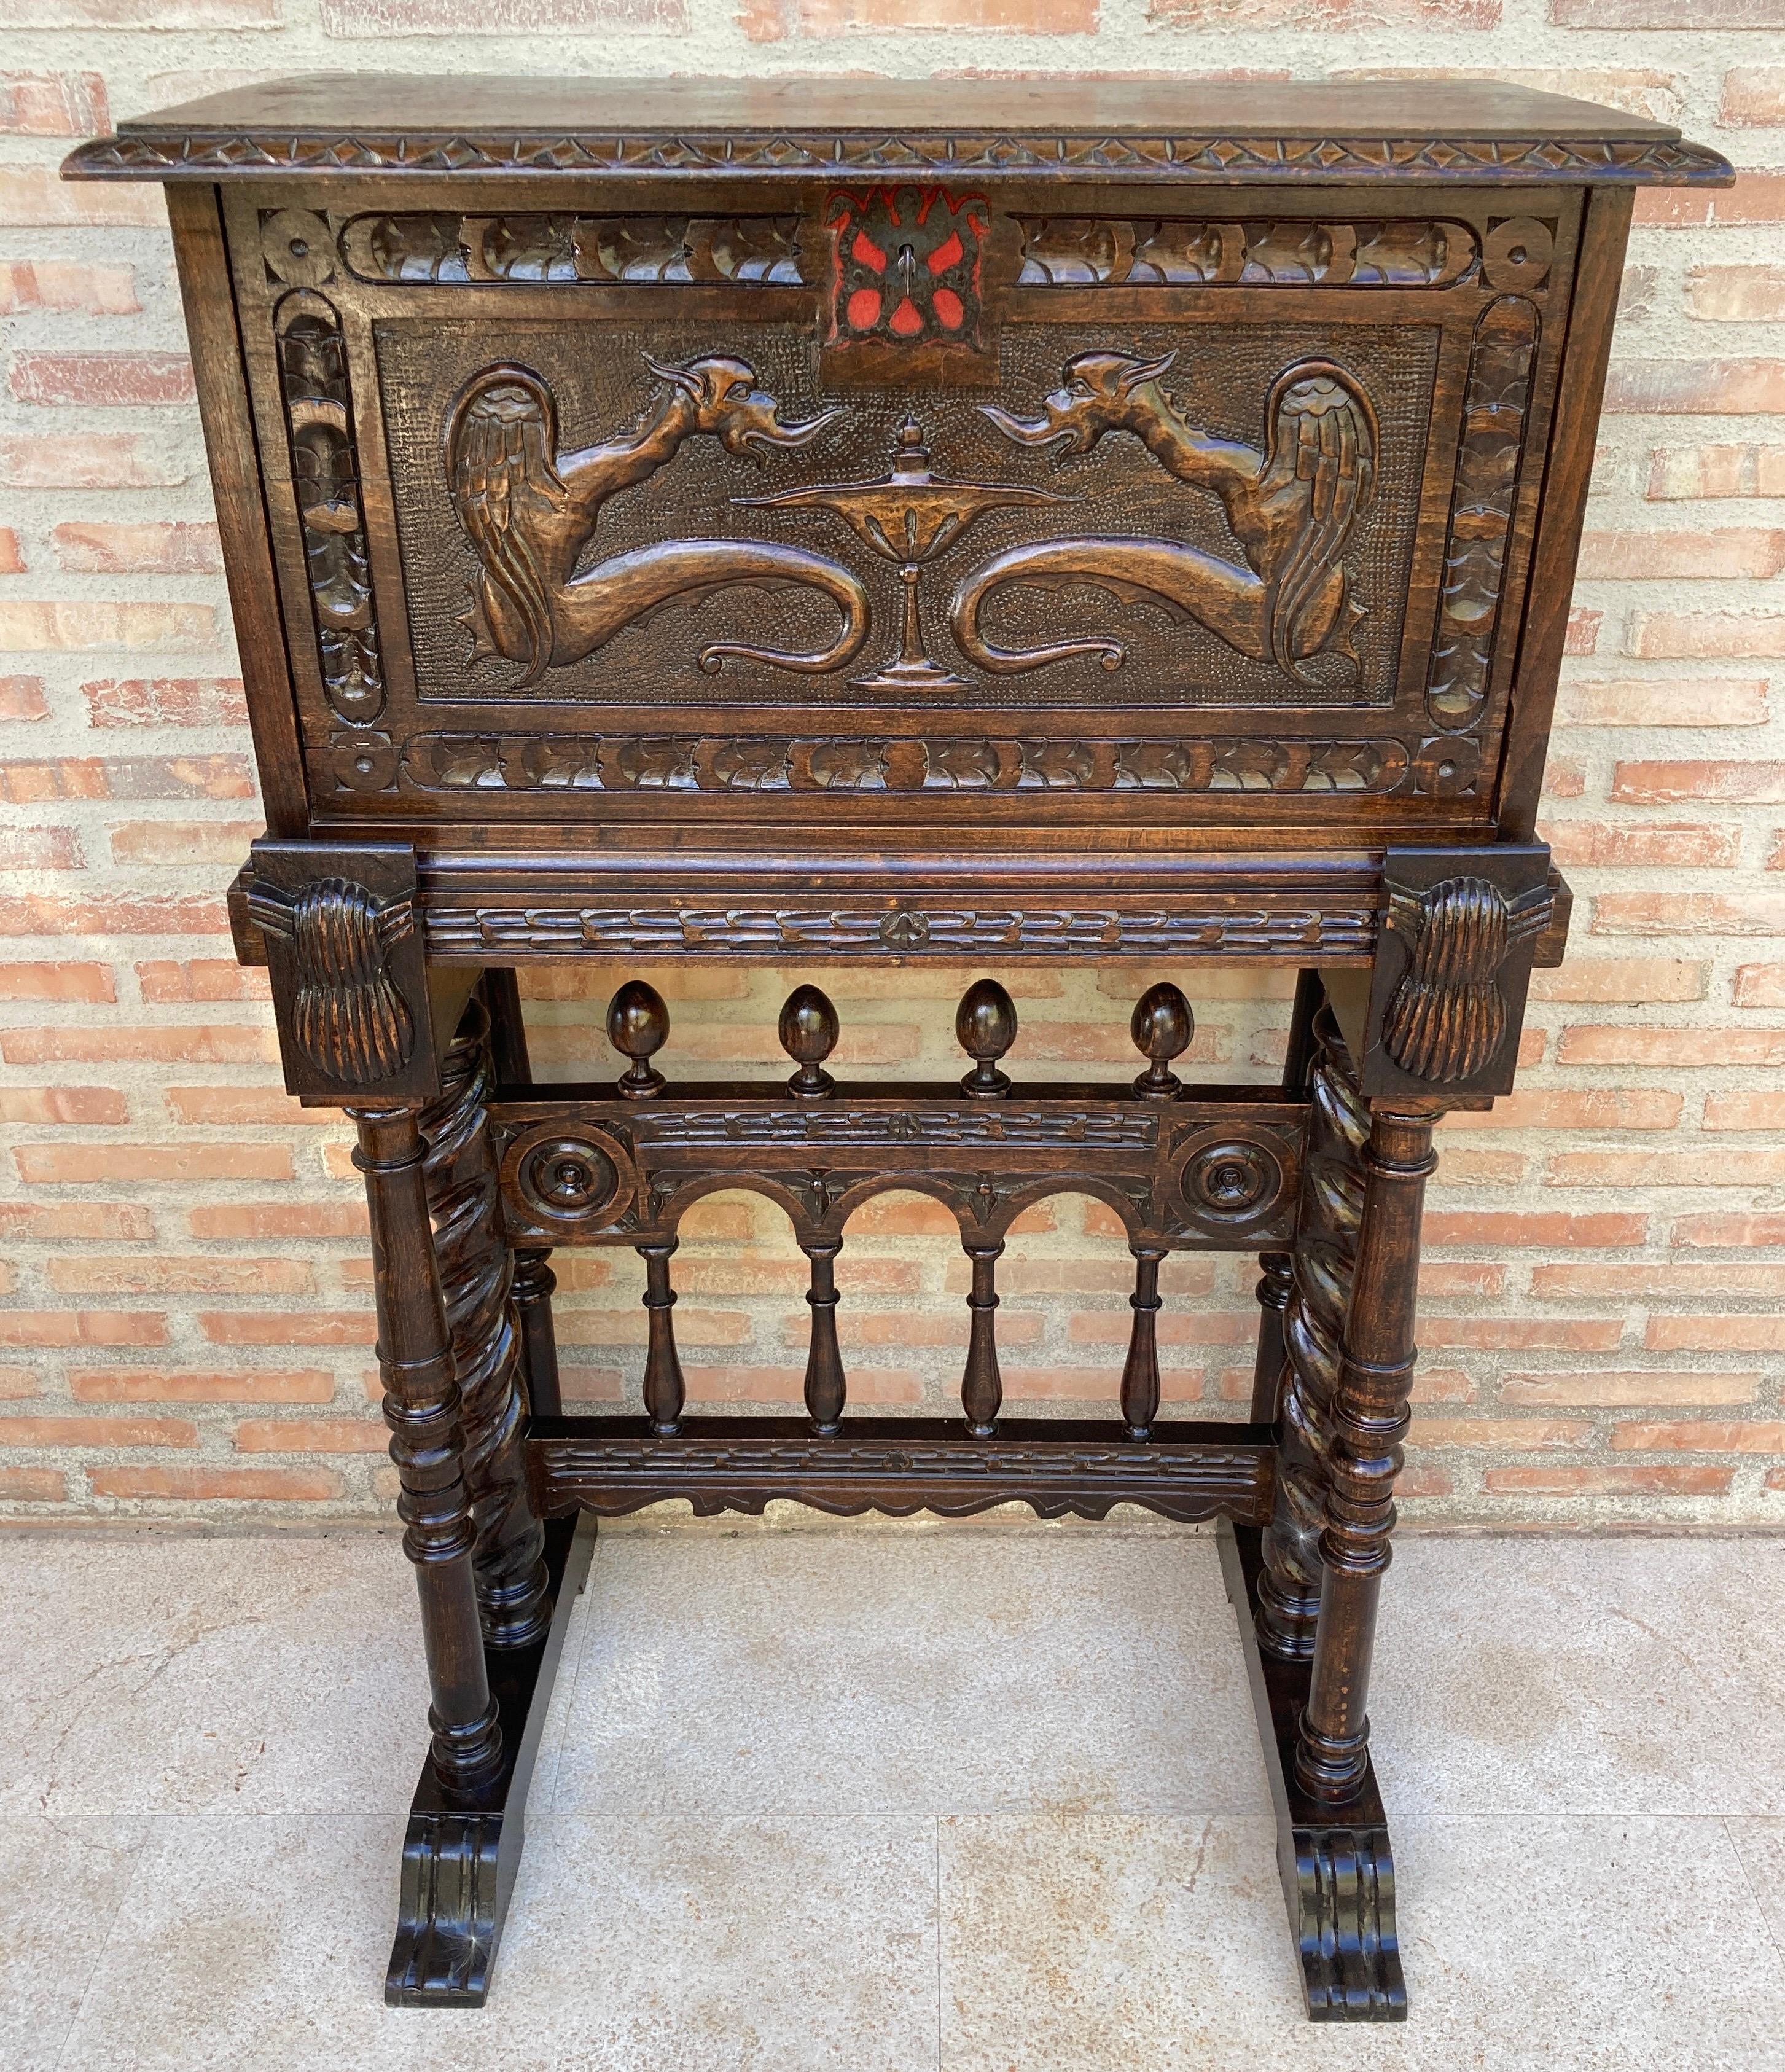 Exquisite late 19th century Renaissance style Spanish Bargueno cabinet, richly carved with wrought iron lock and coil legs.
Incredible details and craftsmanship in a most impressive designer style. The cabinet is full of detail all around and looks